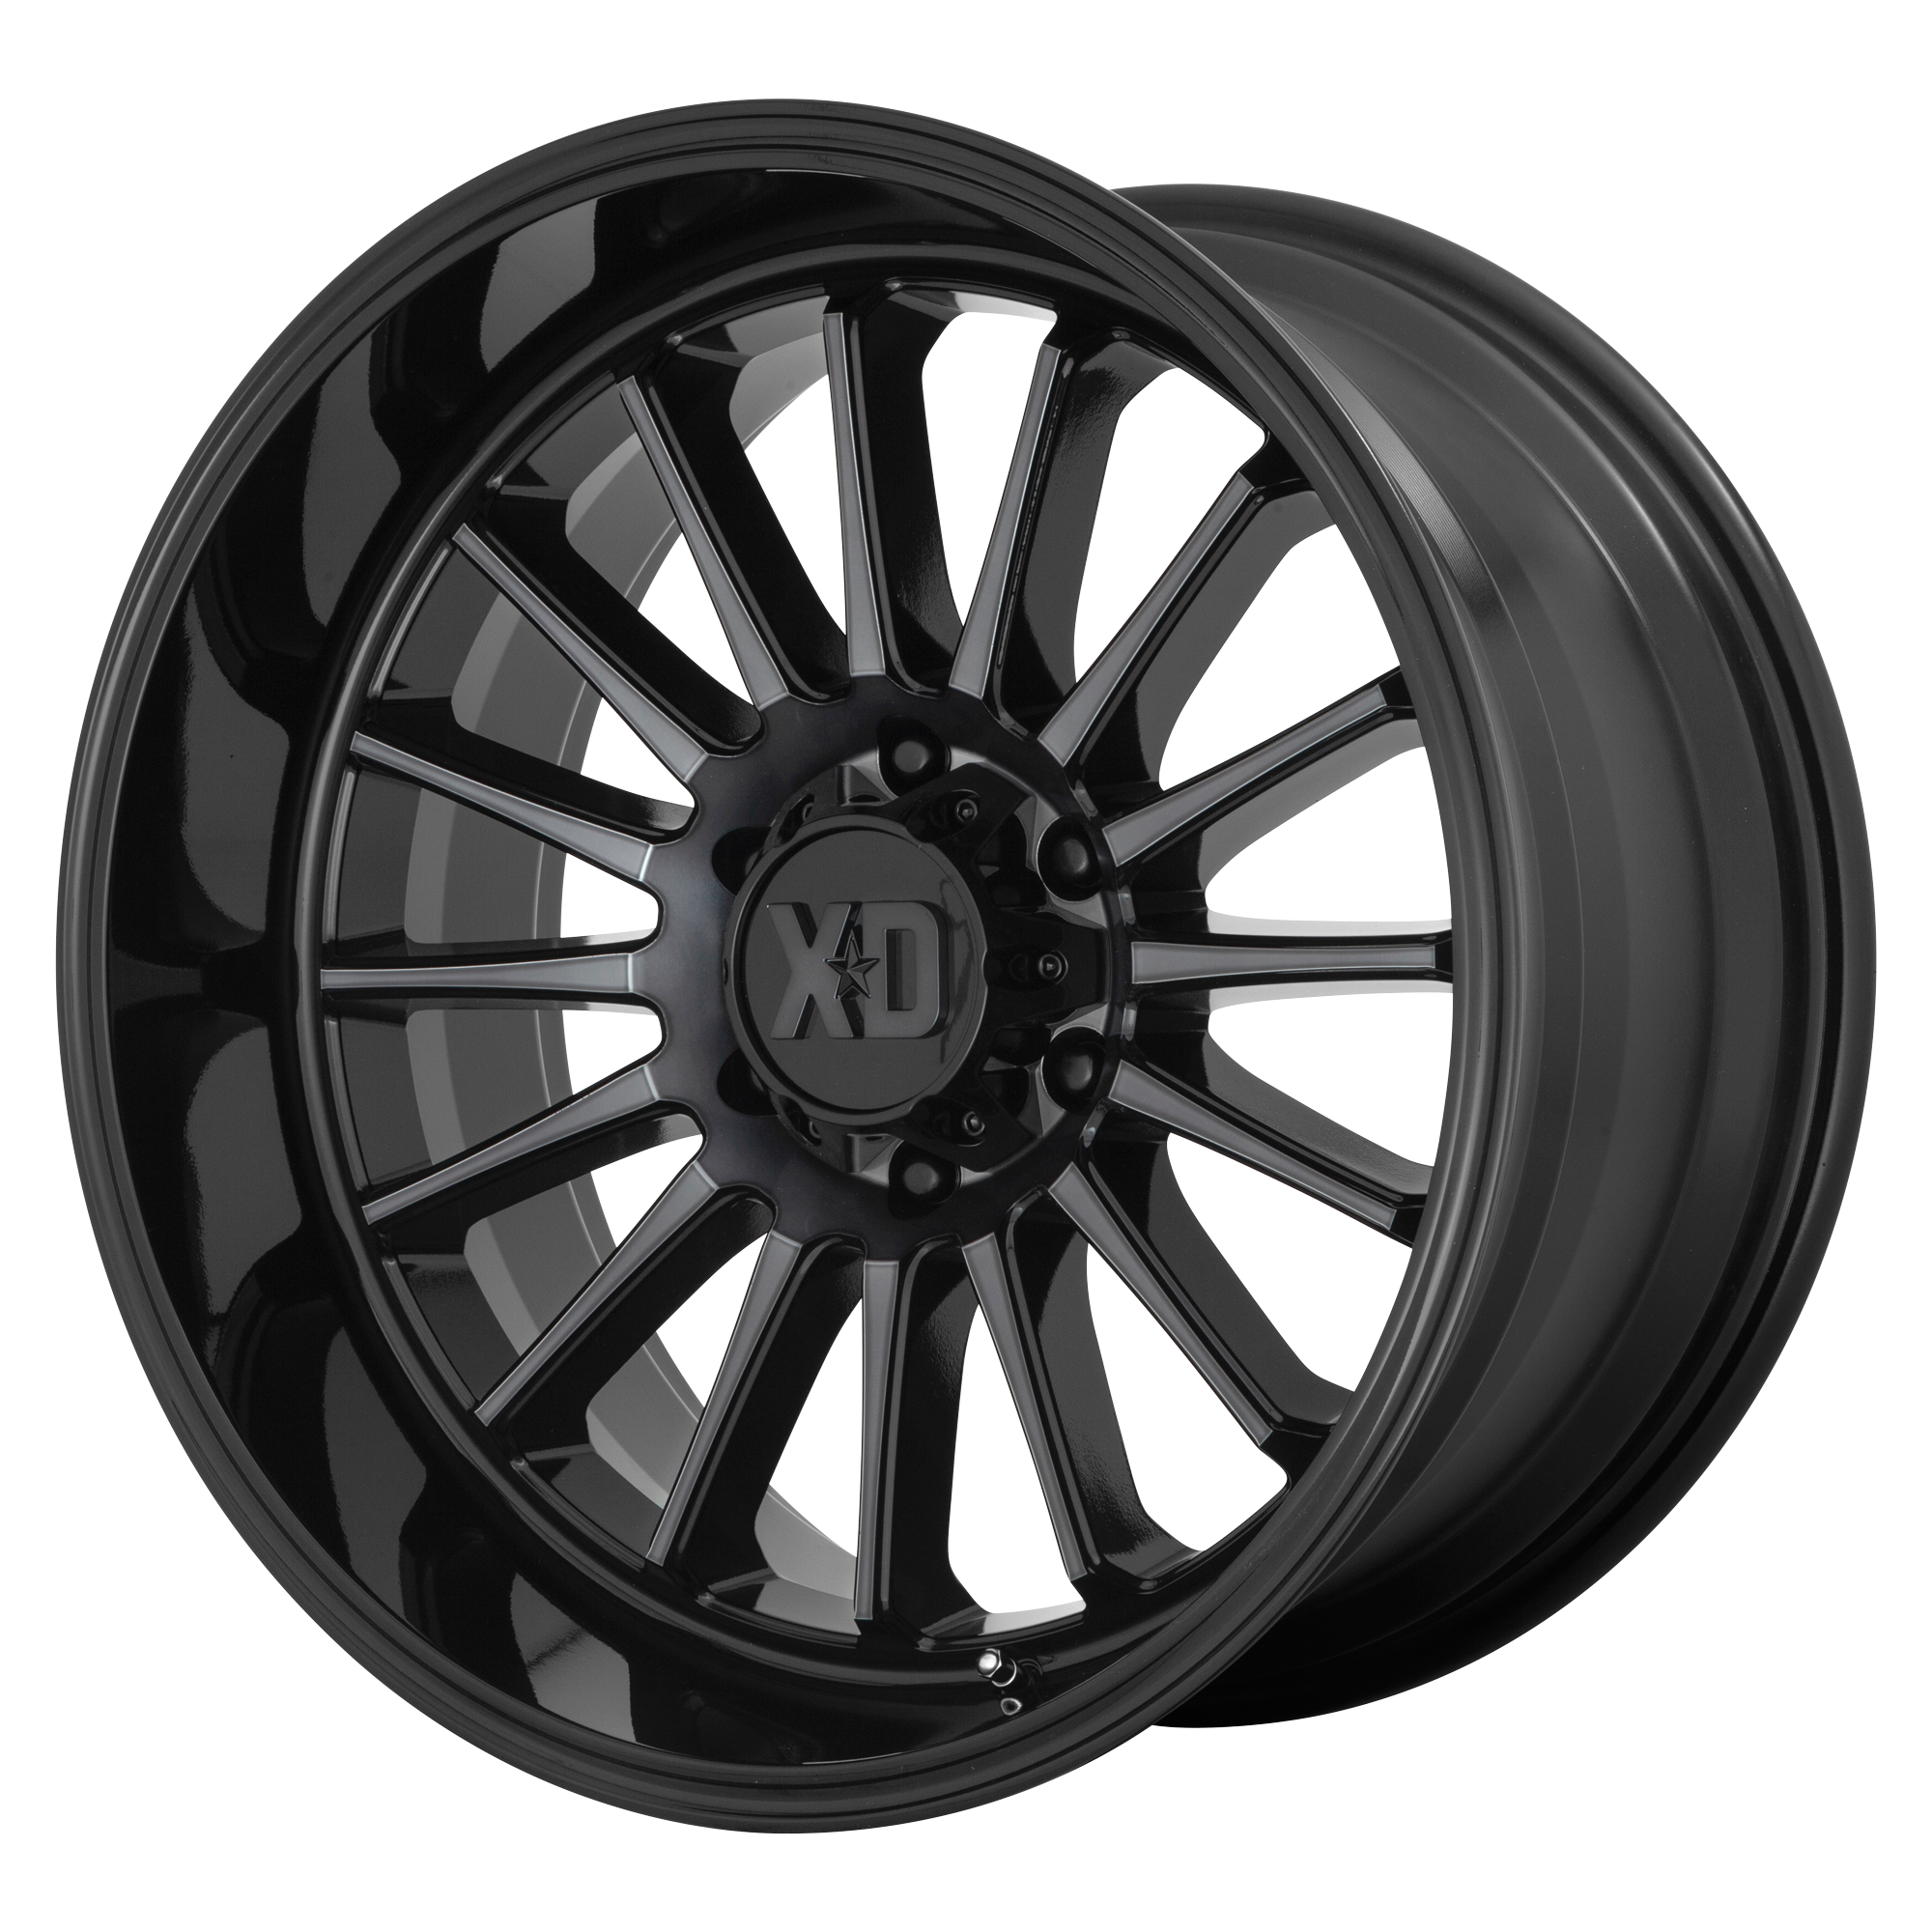 XD857 20x10 6x135.00 GLOSS BLACK W/ GRAY TINT (-18 mm) - Tires and Engine Performance